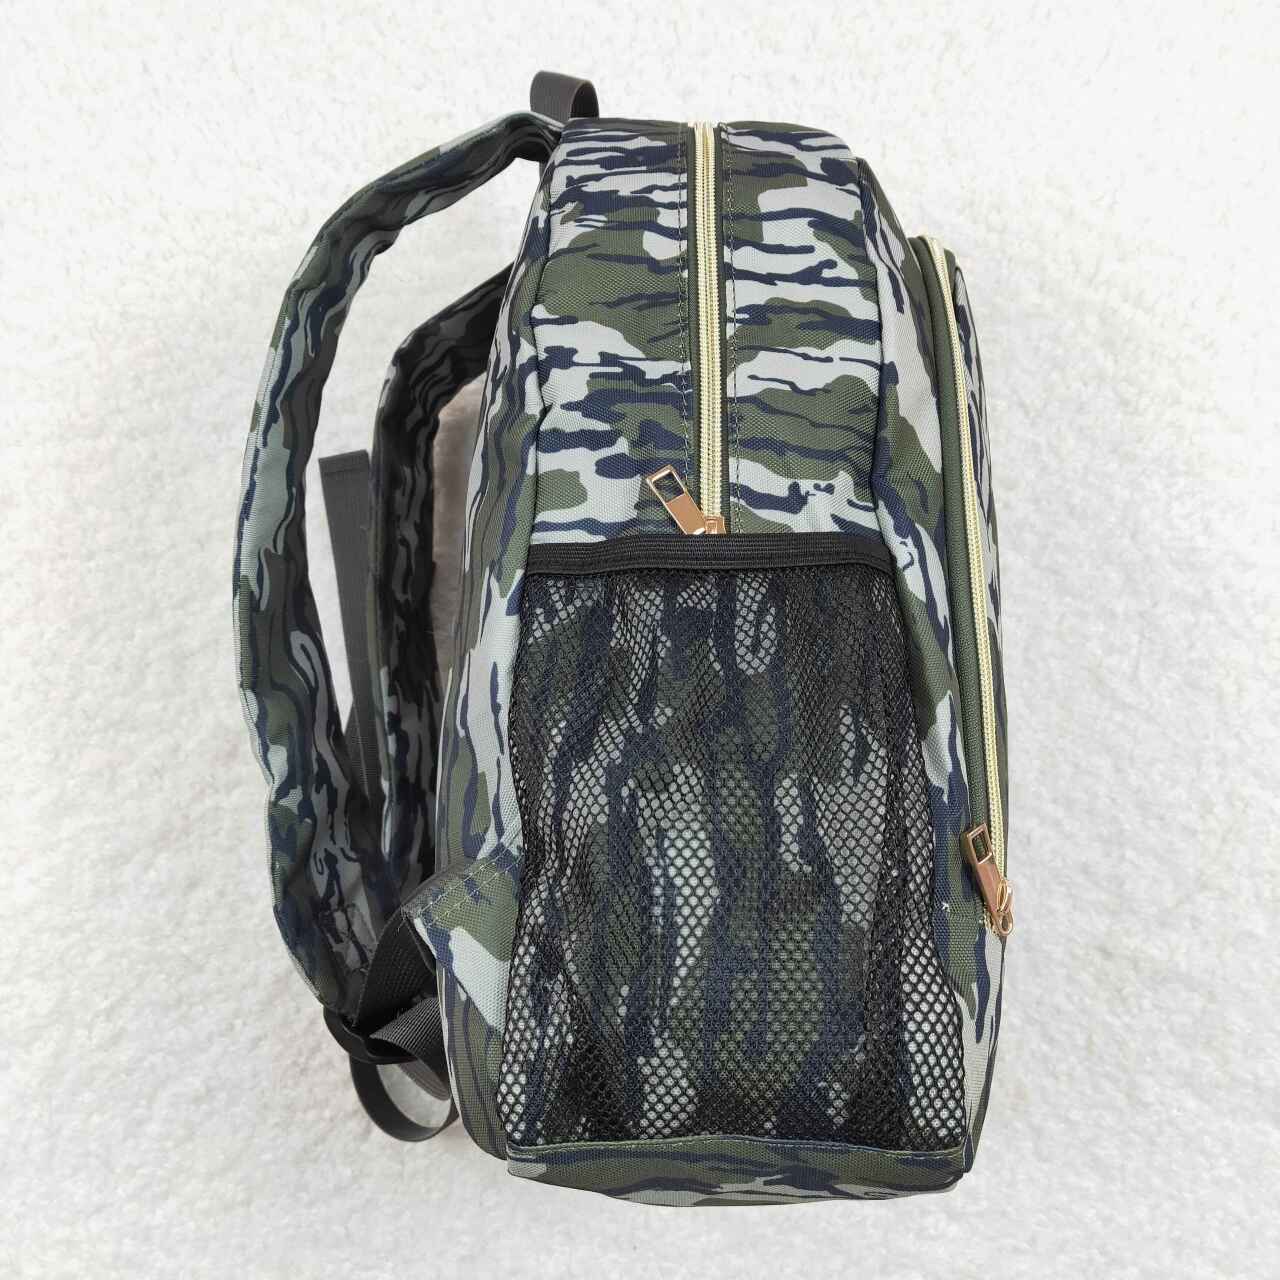 BA0163 Casual camouflage army green backpack